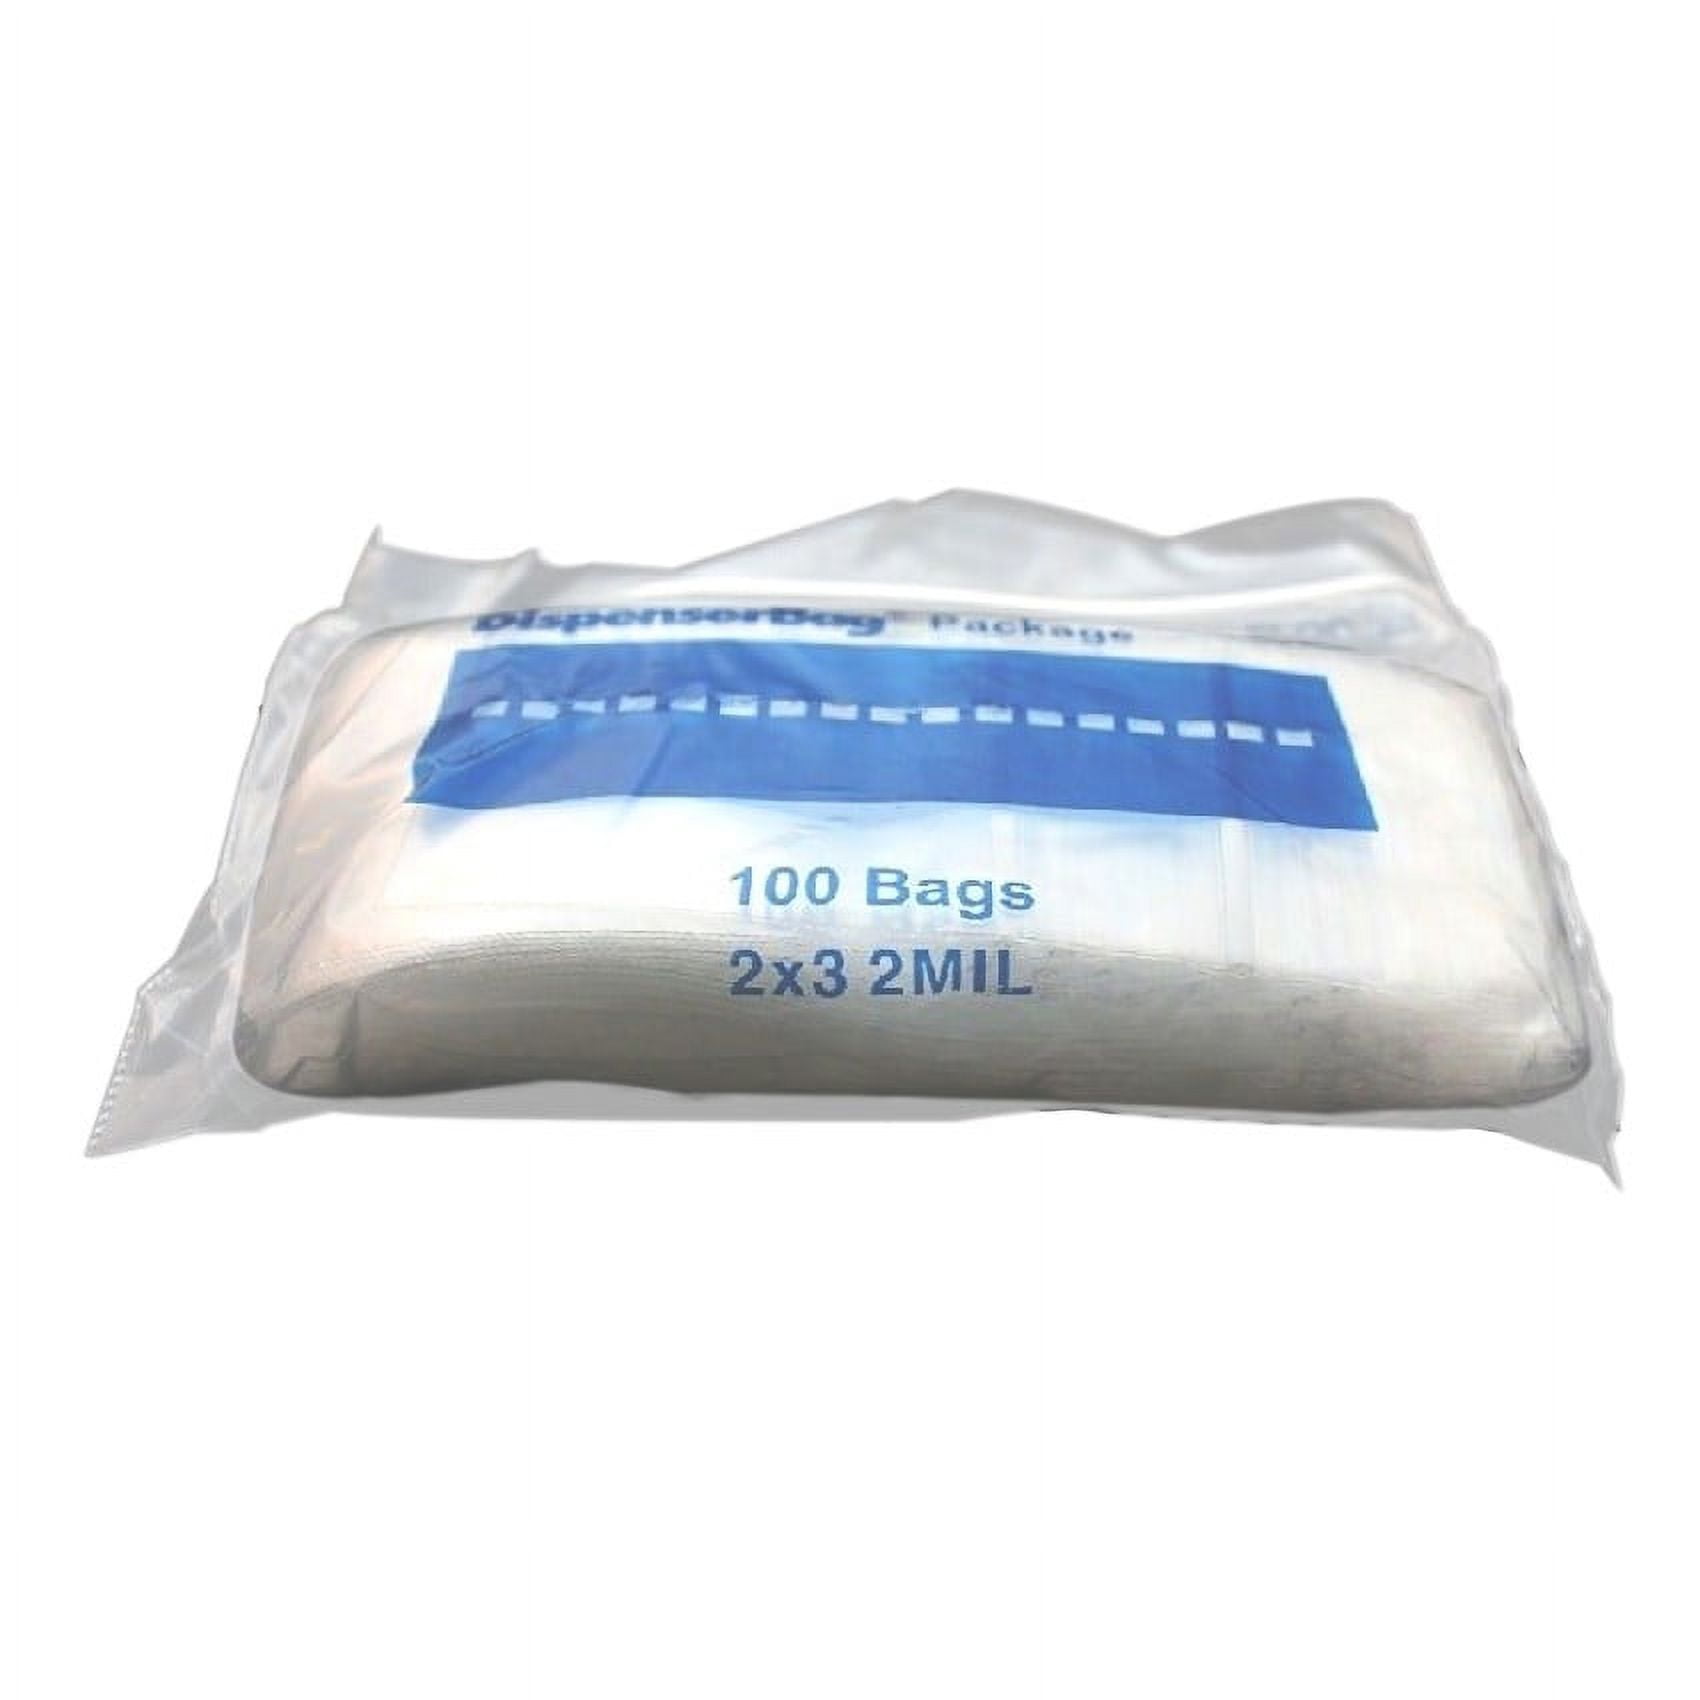 2 x 3 CLEAR WHITEBLOCK ZIP LOCK POLY BAG 2MIL – SHIPPING CONNECTS